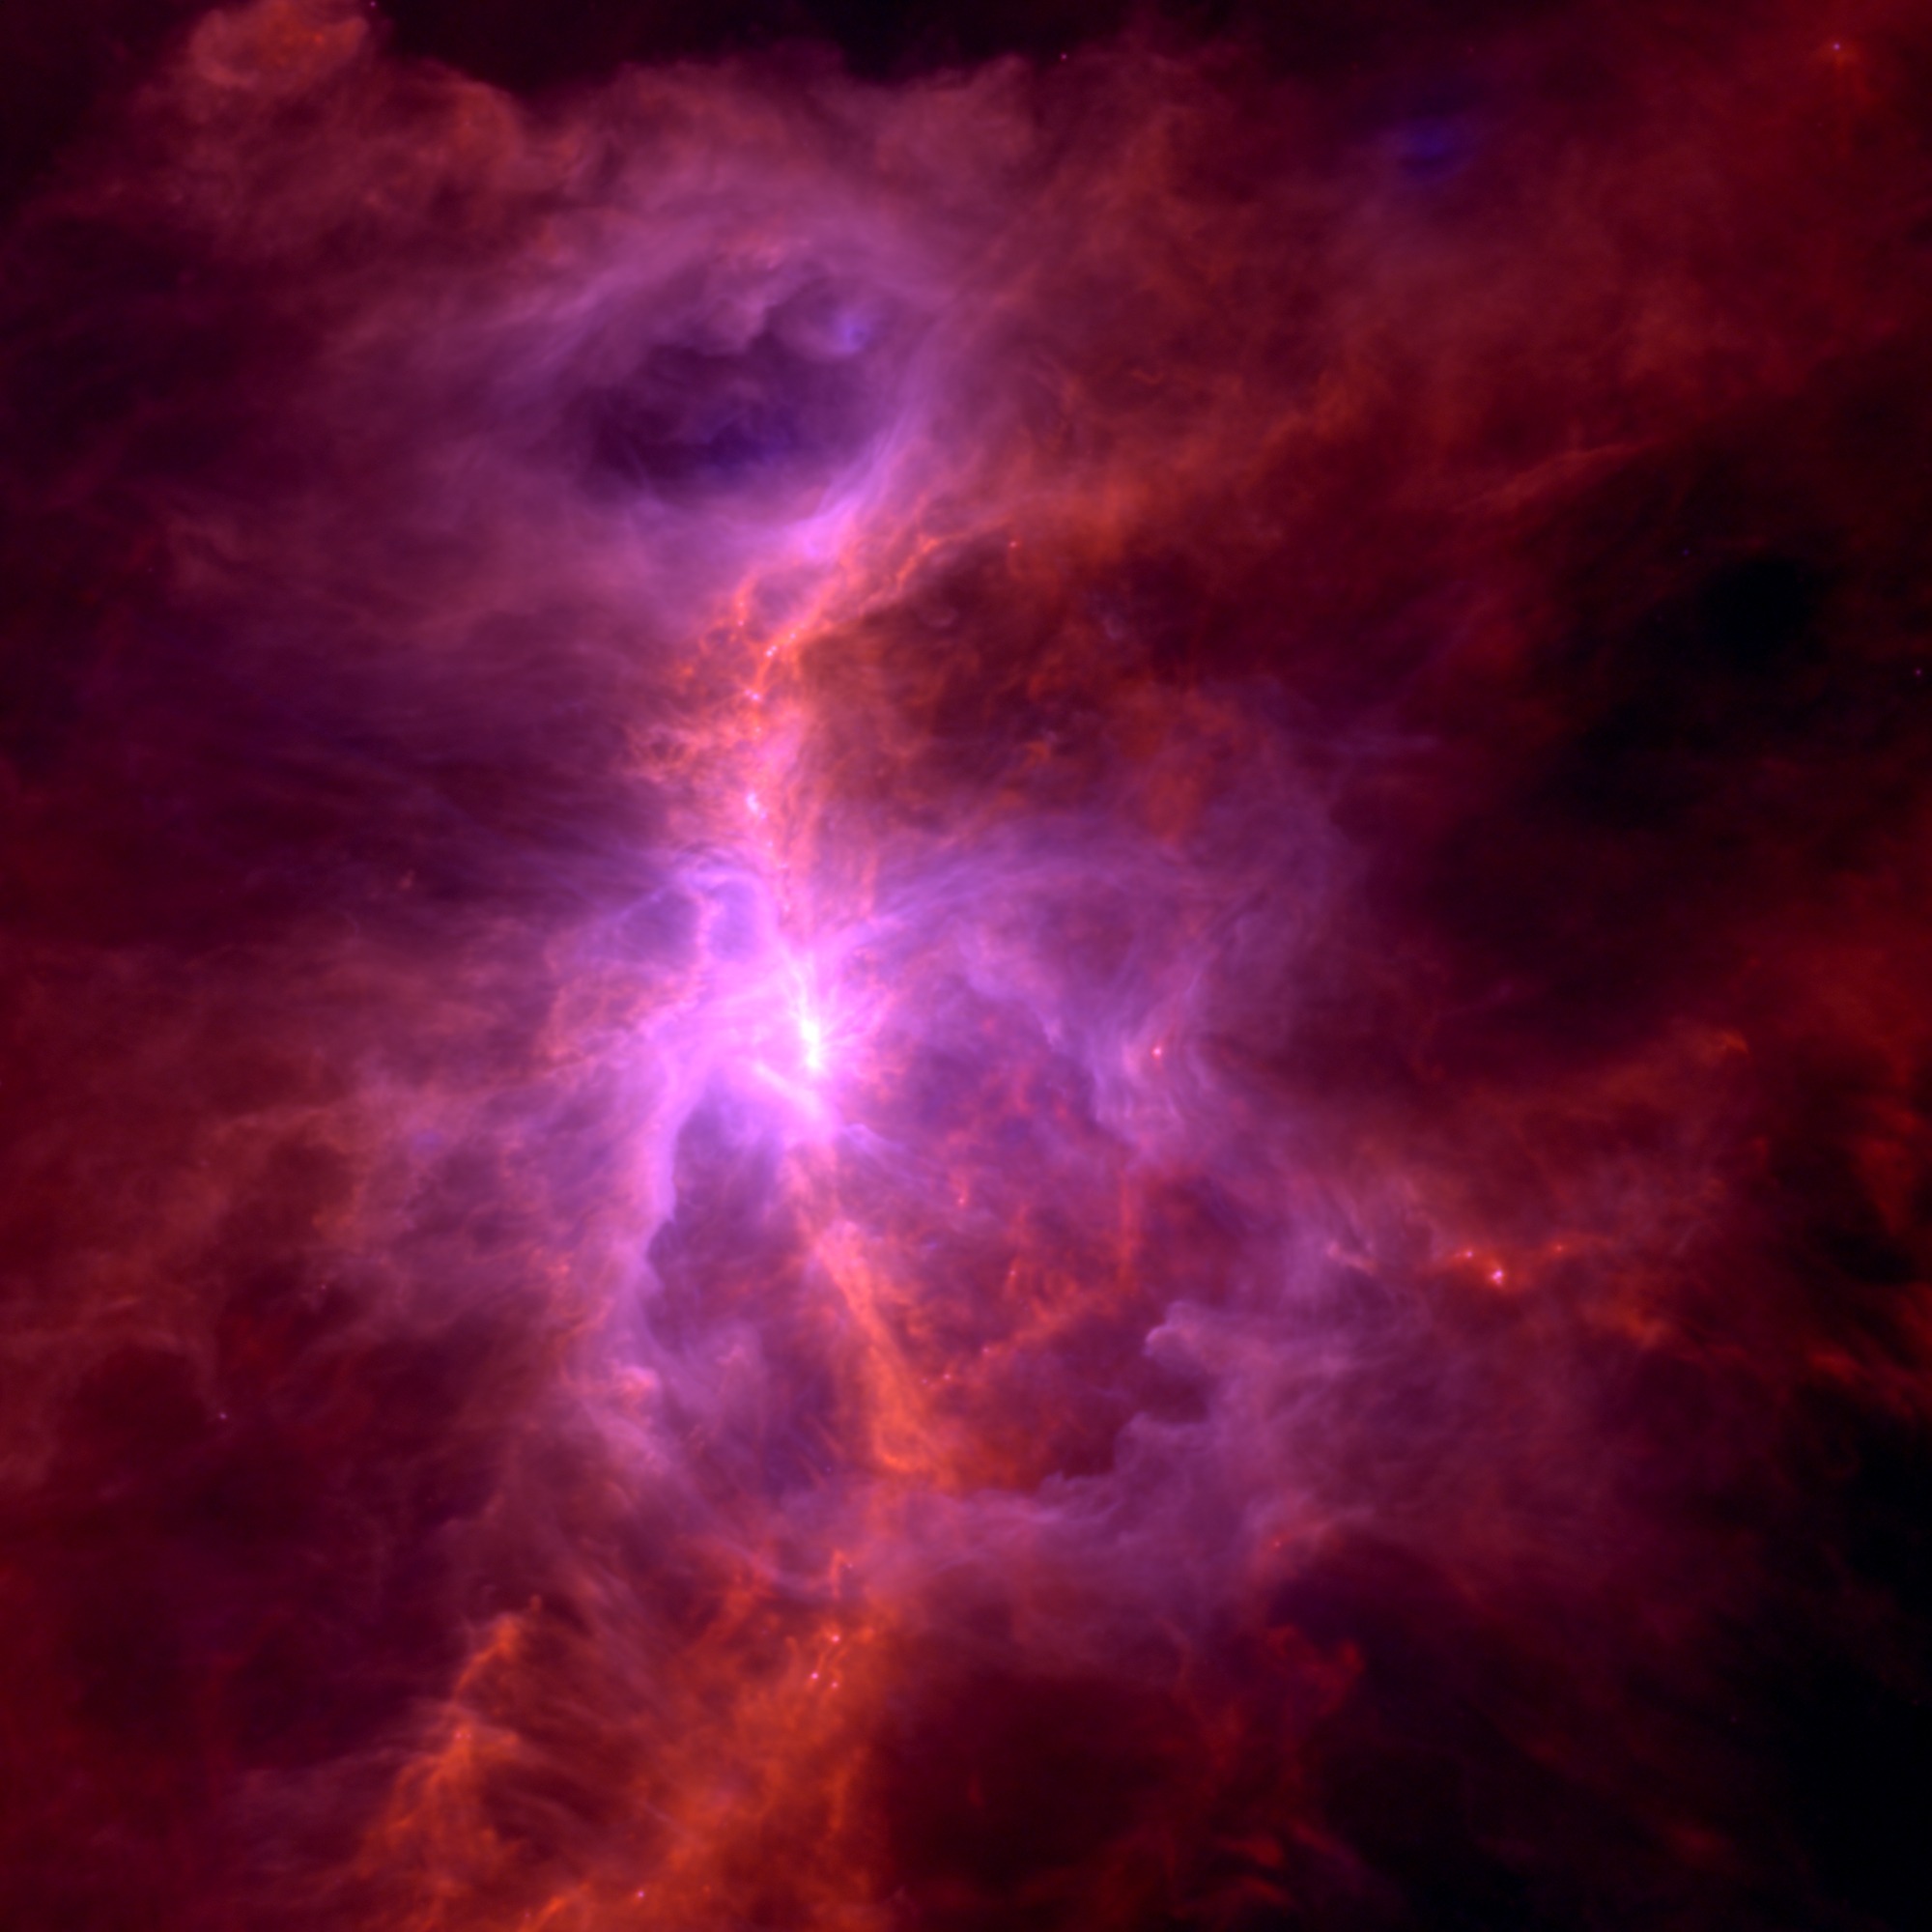 M42 as seen in the infrared